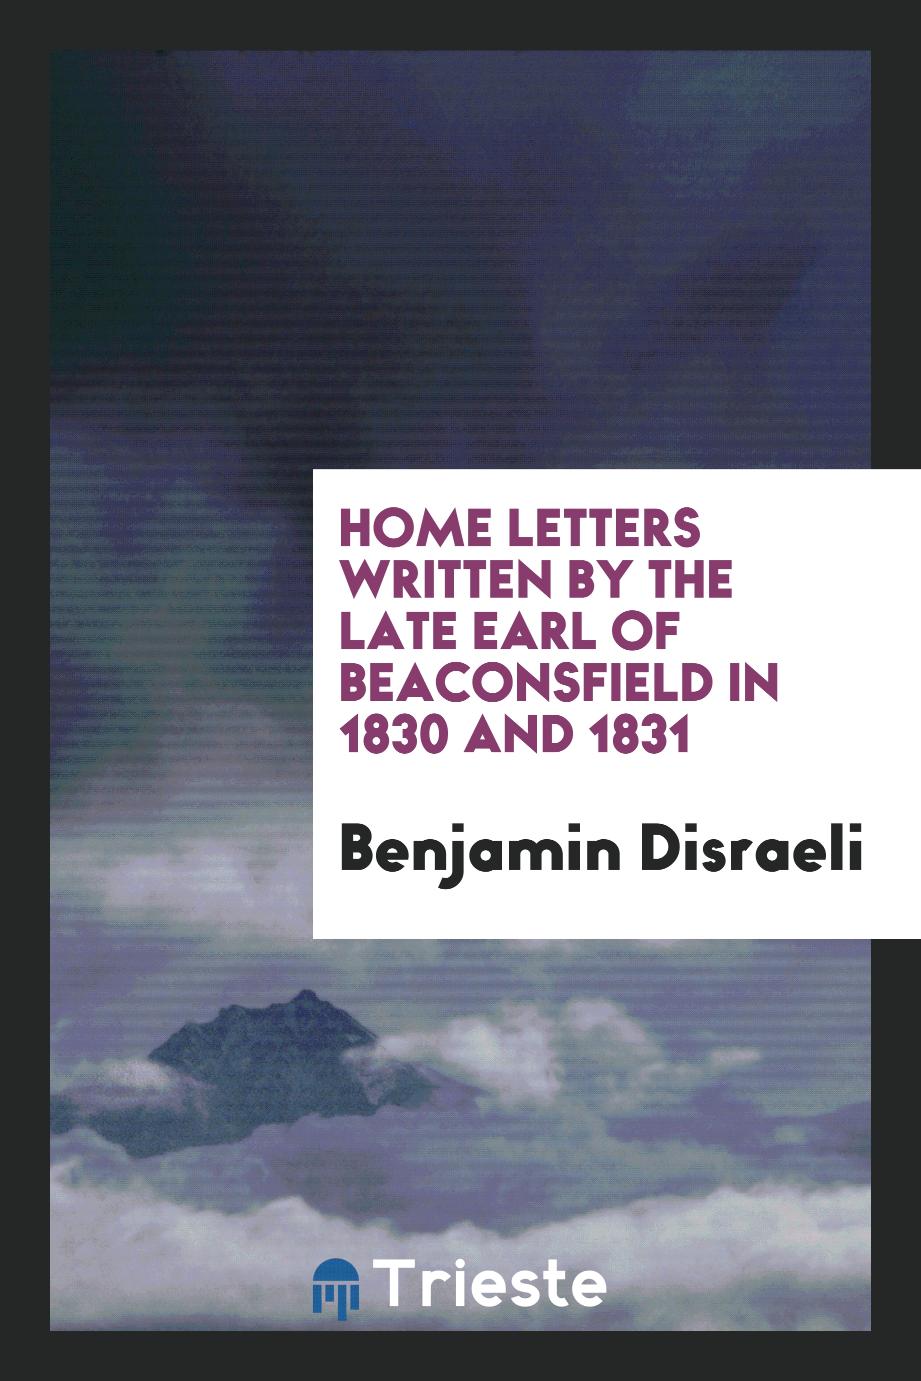 Home Letters Written by the Late Earl of Beaconsfield in 1830 and 1831